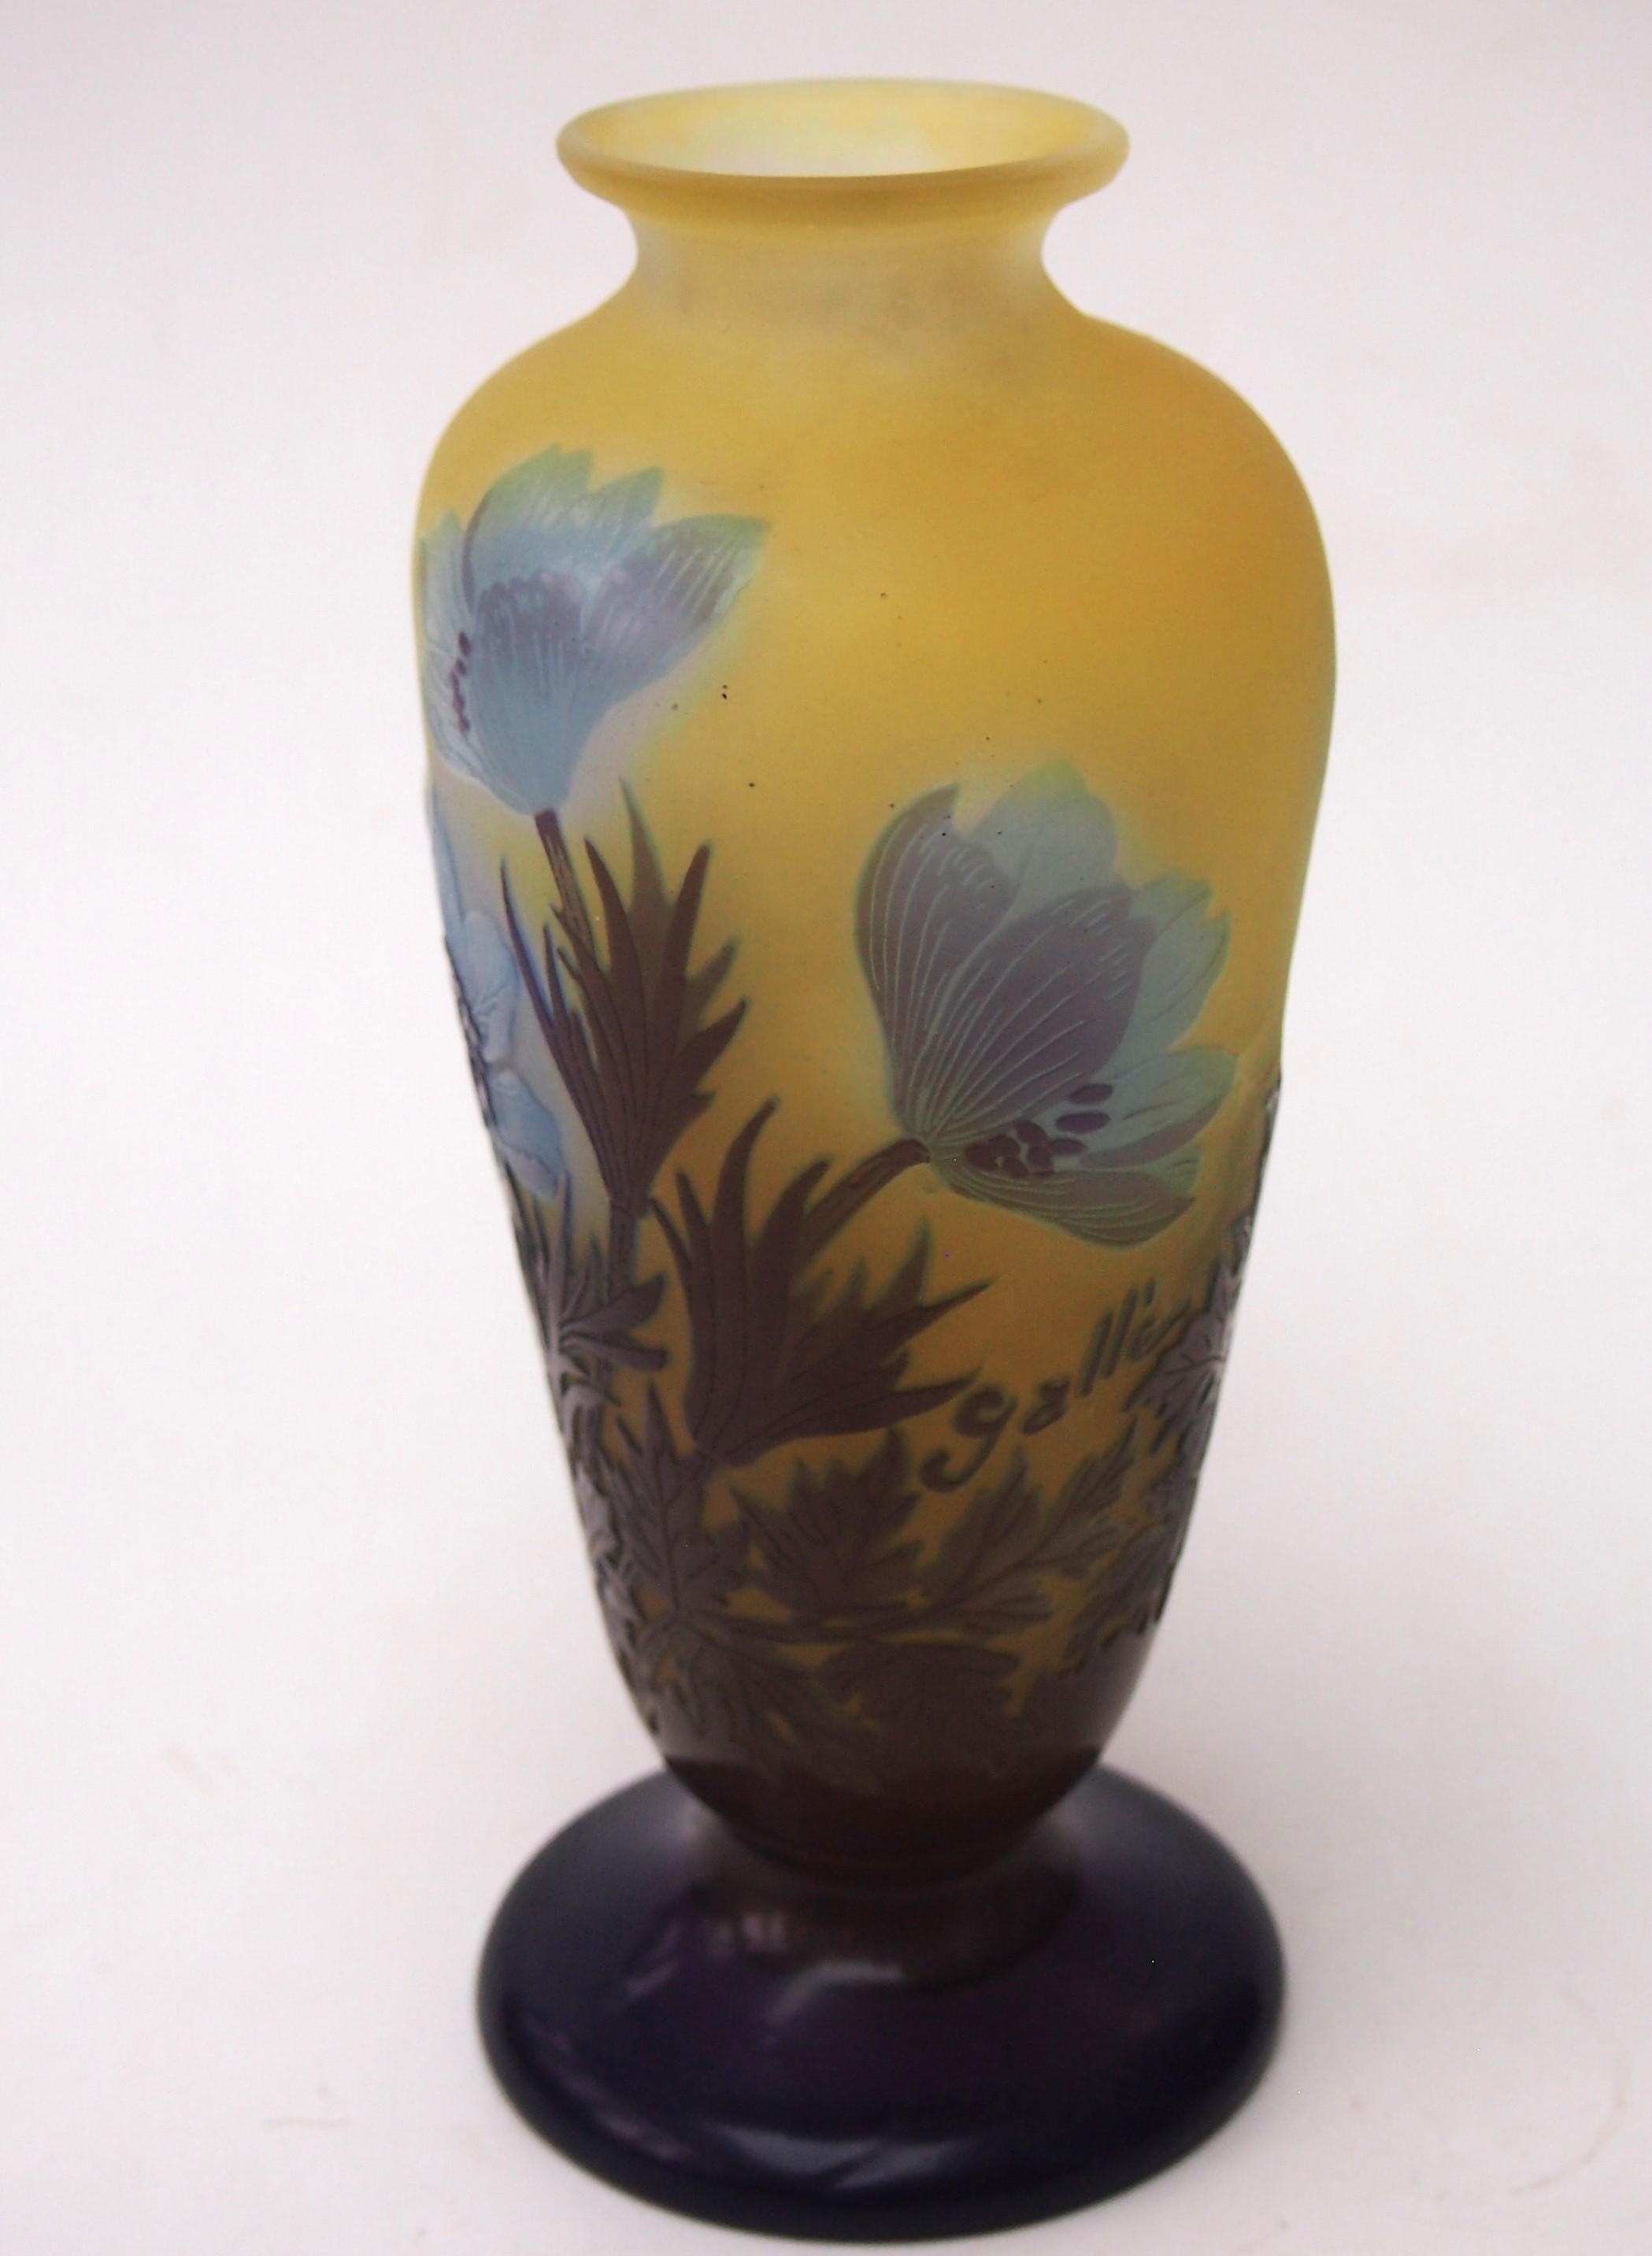 French Art Nouveau Emile Gallé footed cameo vase depicting Flowering Anemone in purple and blue over orange/yellow, with fine internal polishing to highlight the blue in the flowers -A striking and unusual shape-where the internal polishing has not